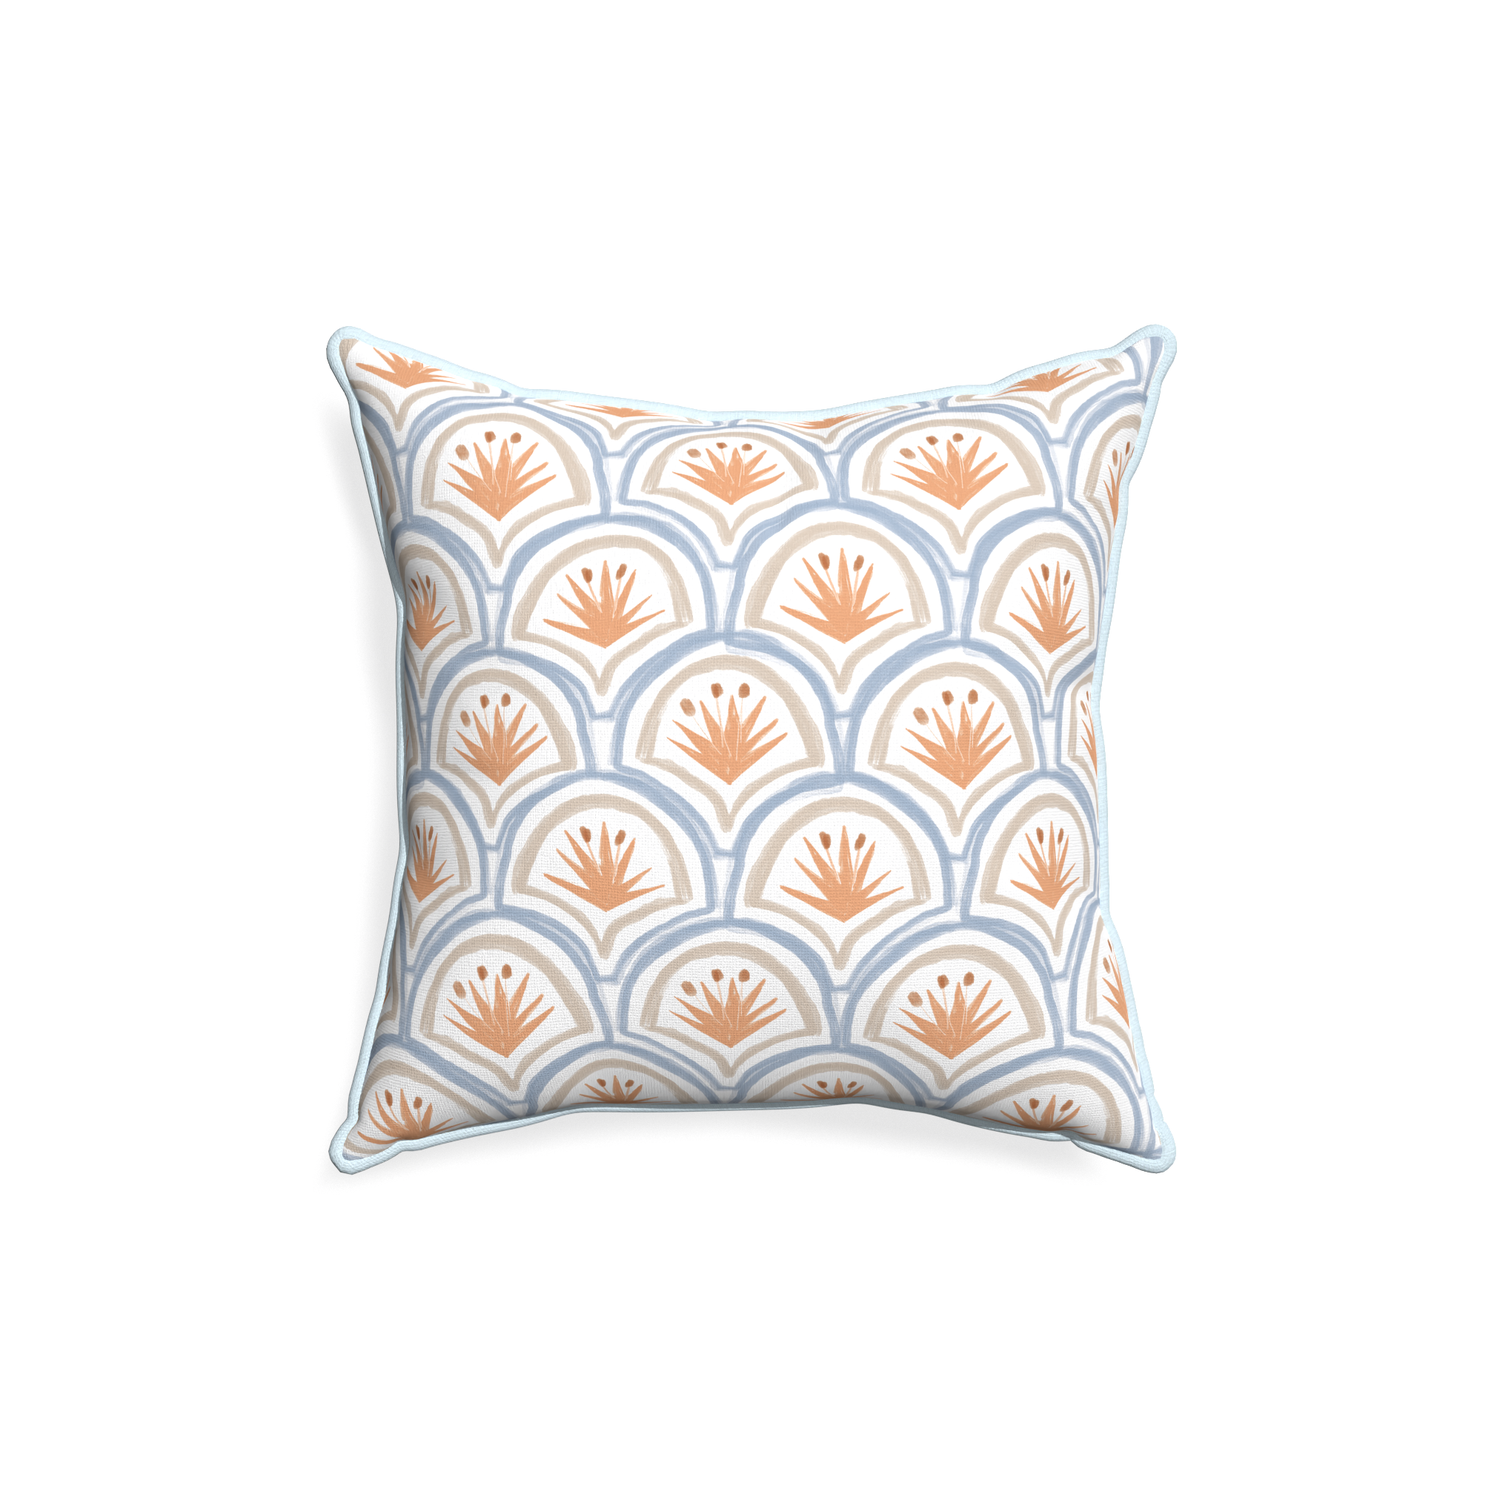 18-square thatcher apricot custom pillow with powder piping on white background